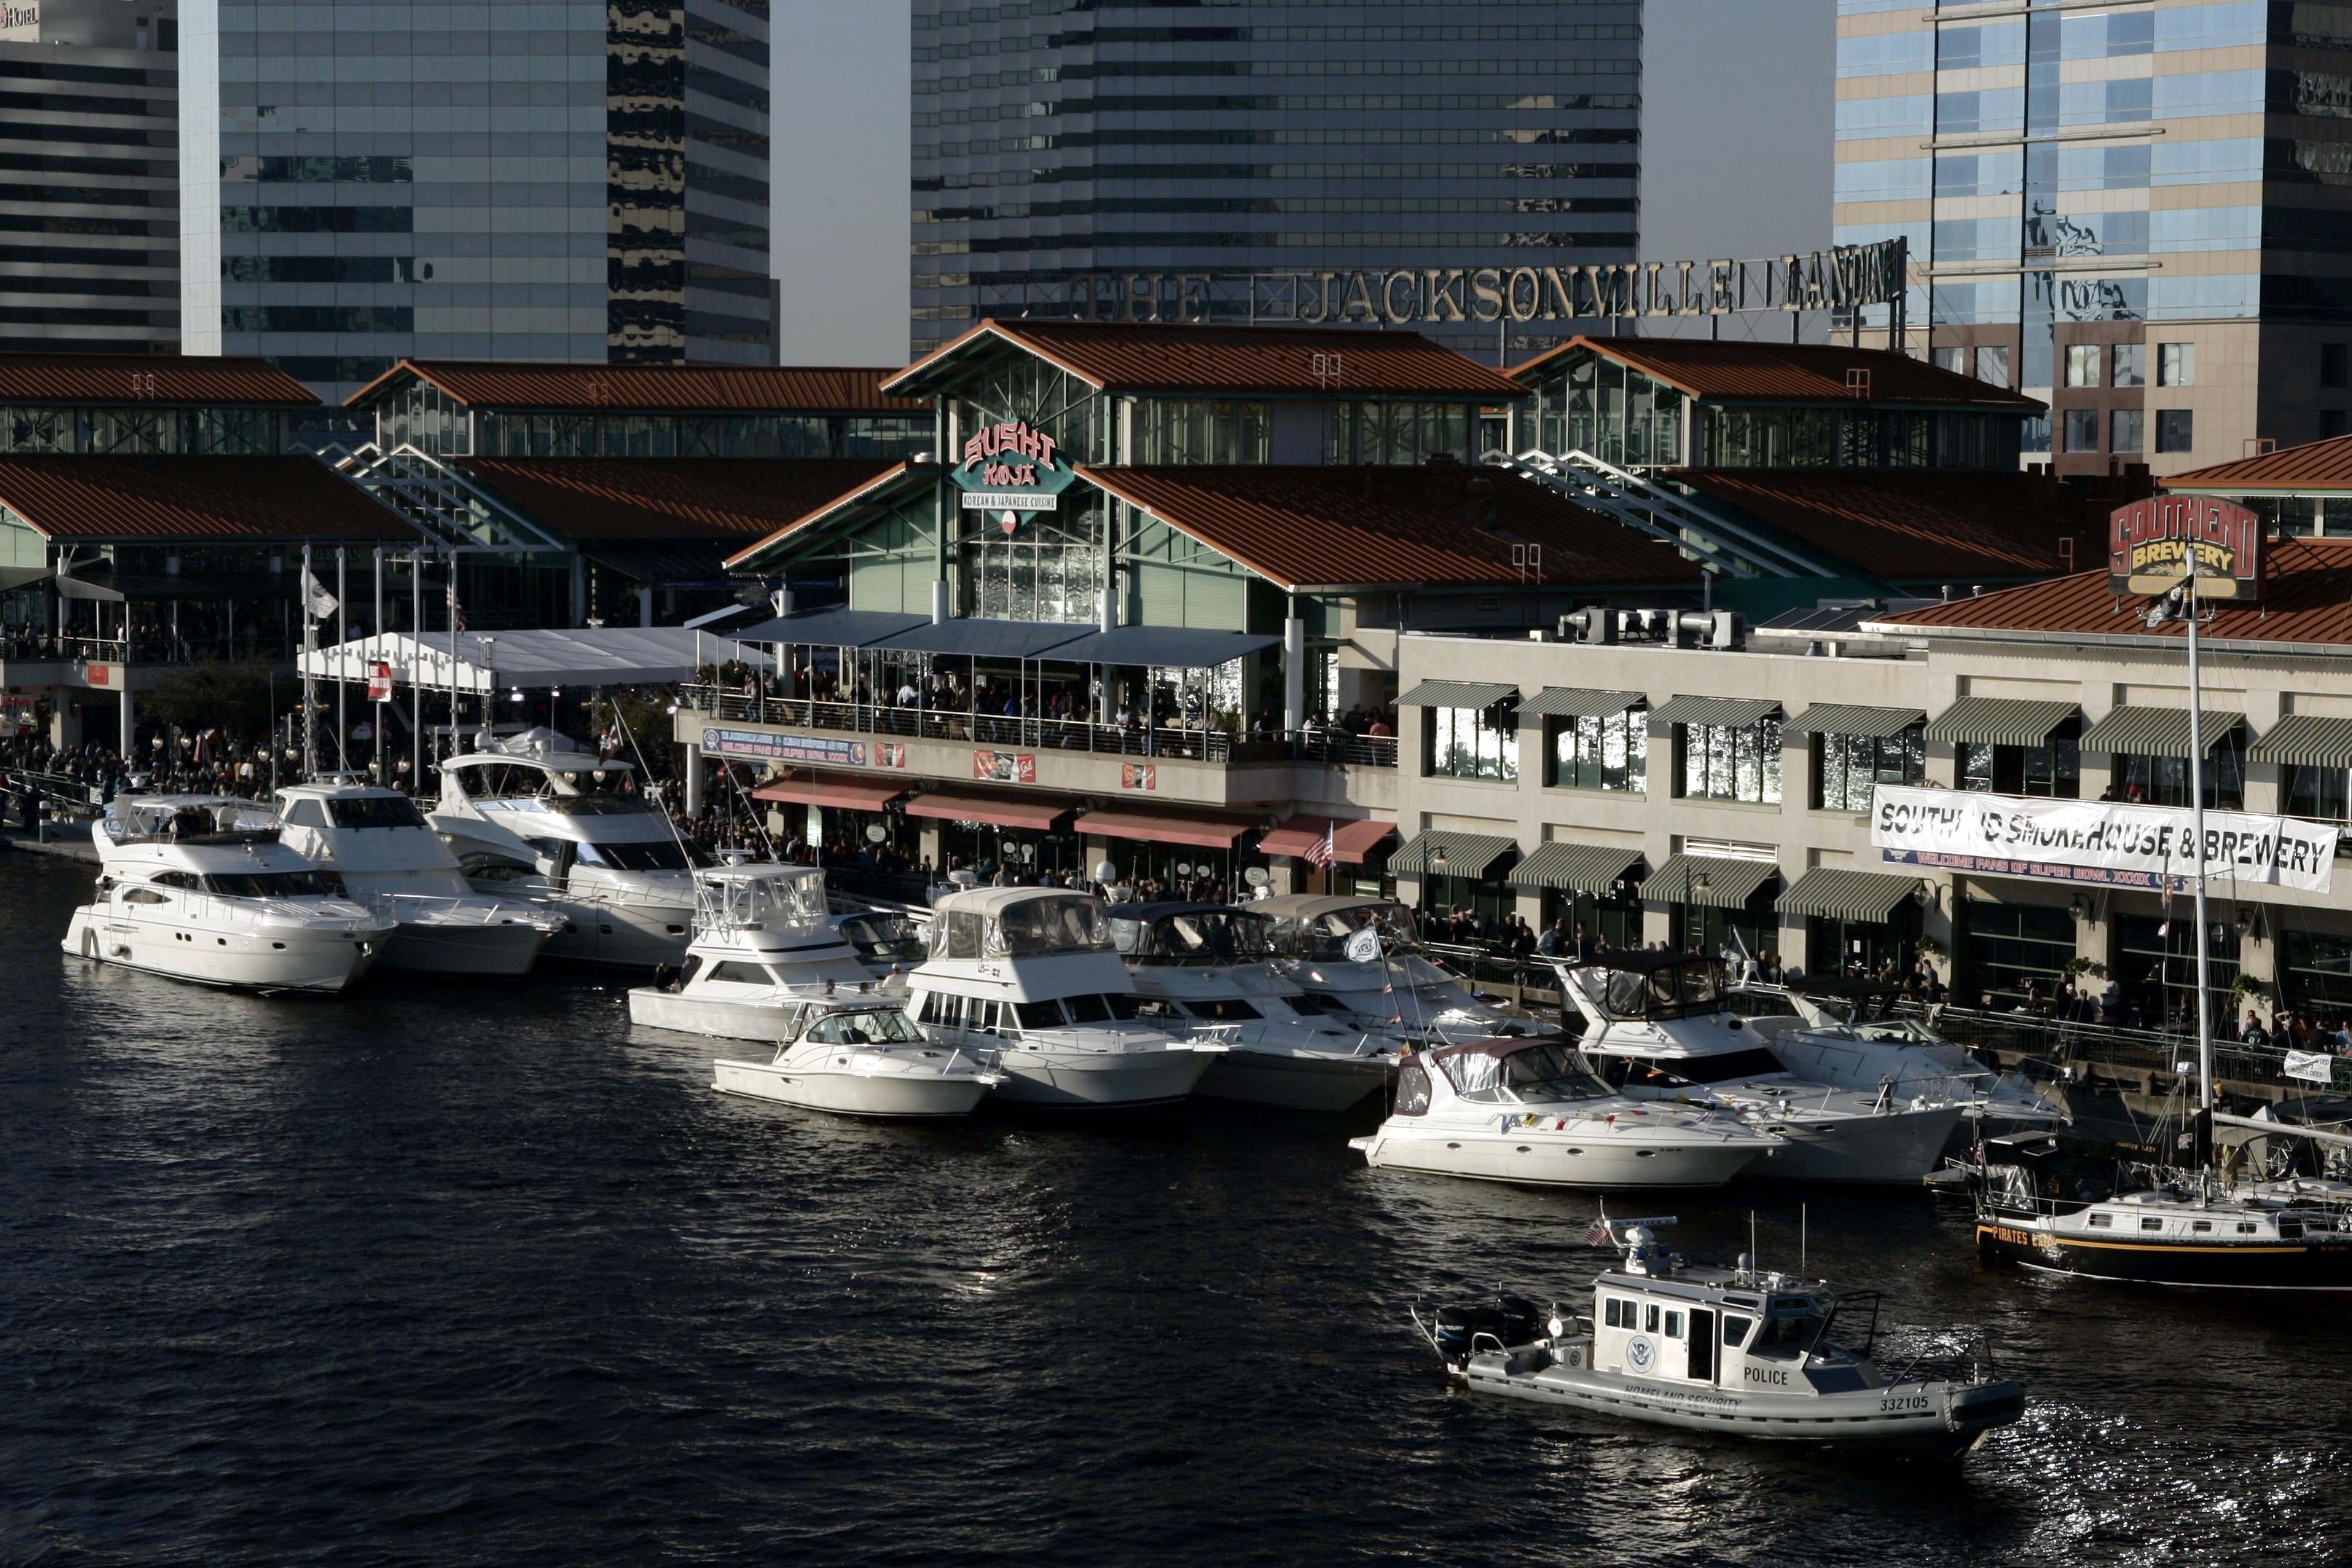 The Jacksonville Landing complex with boats in front of it.